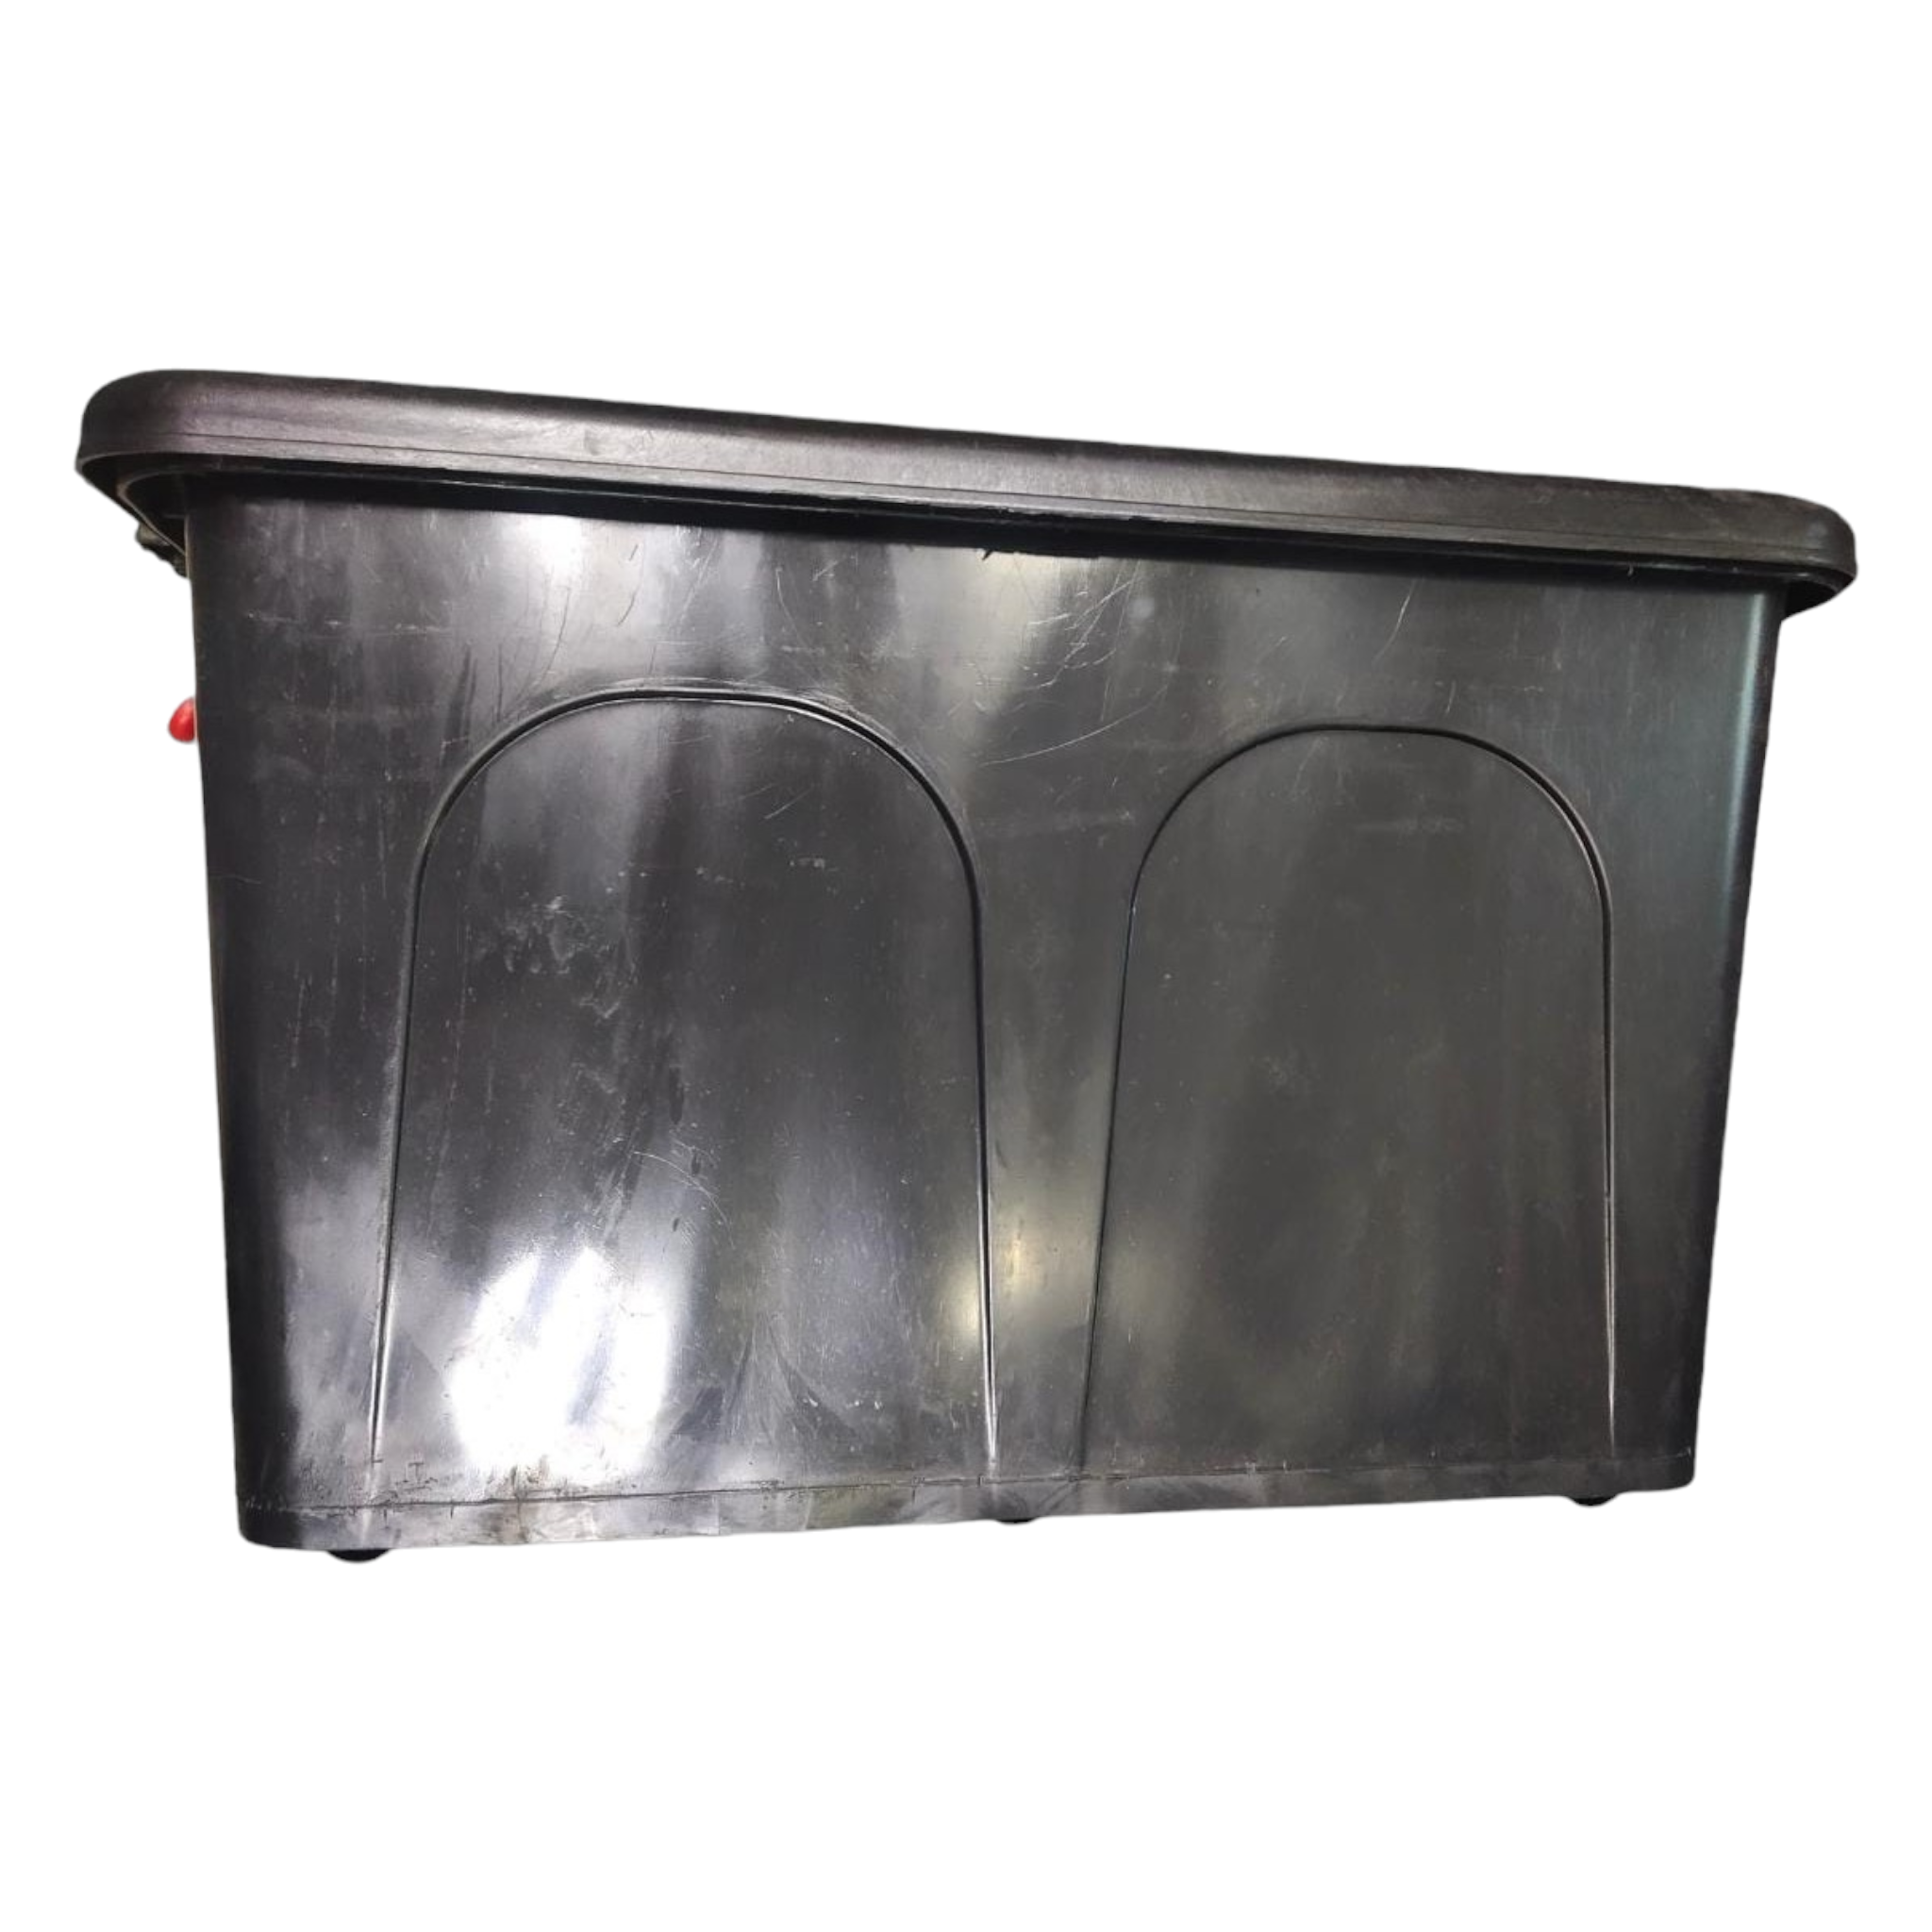 85L Storage Box Plastic Utility Container Black with Wheels